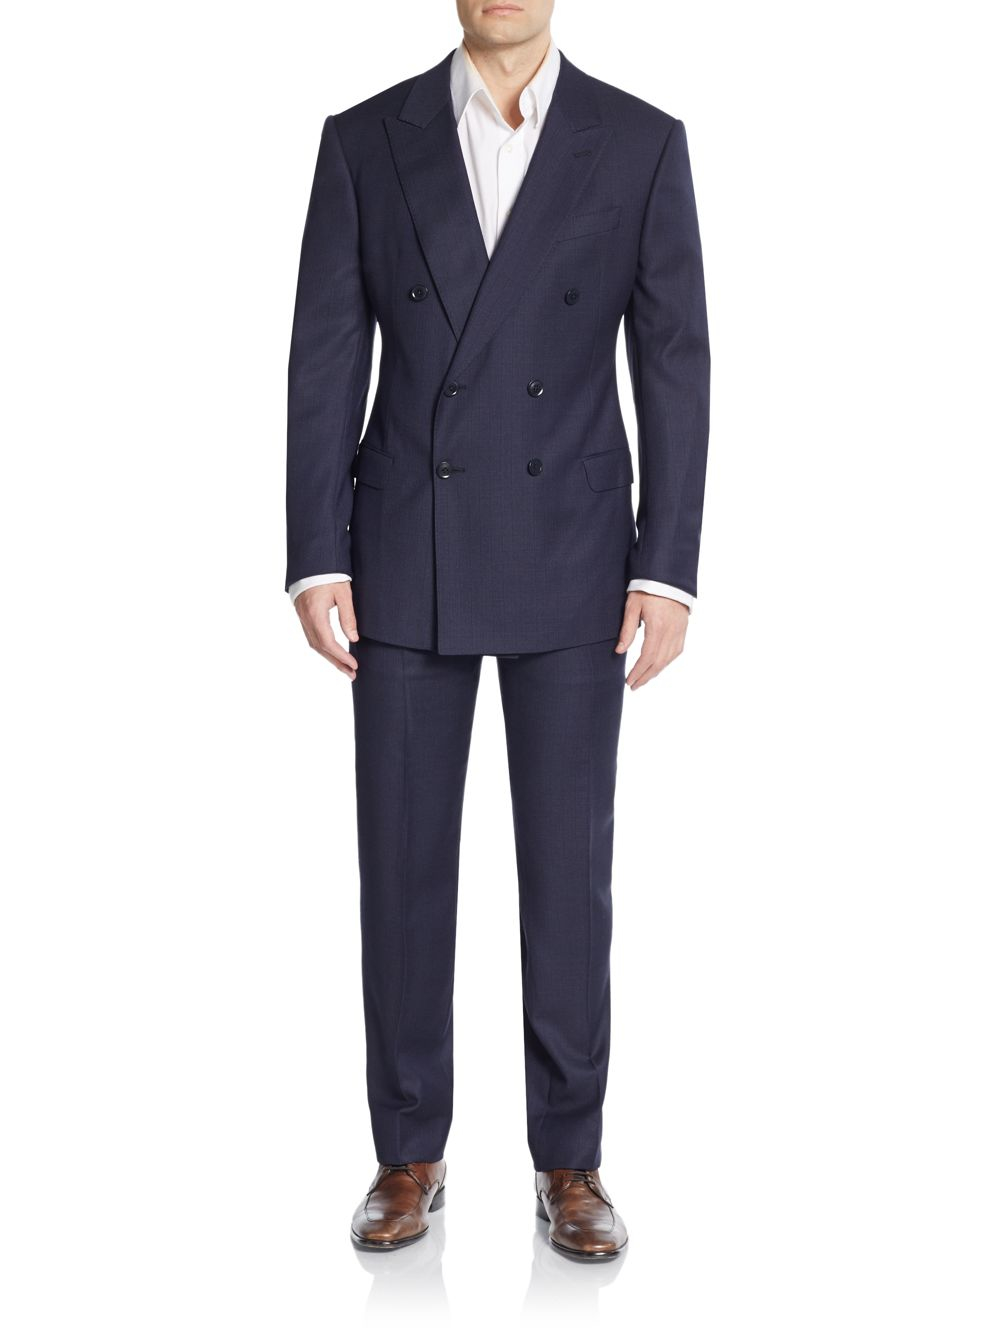 Armani S-line Double-breasted Suit in Navy (Blue) for Men - Lyst